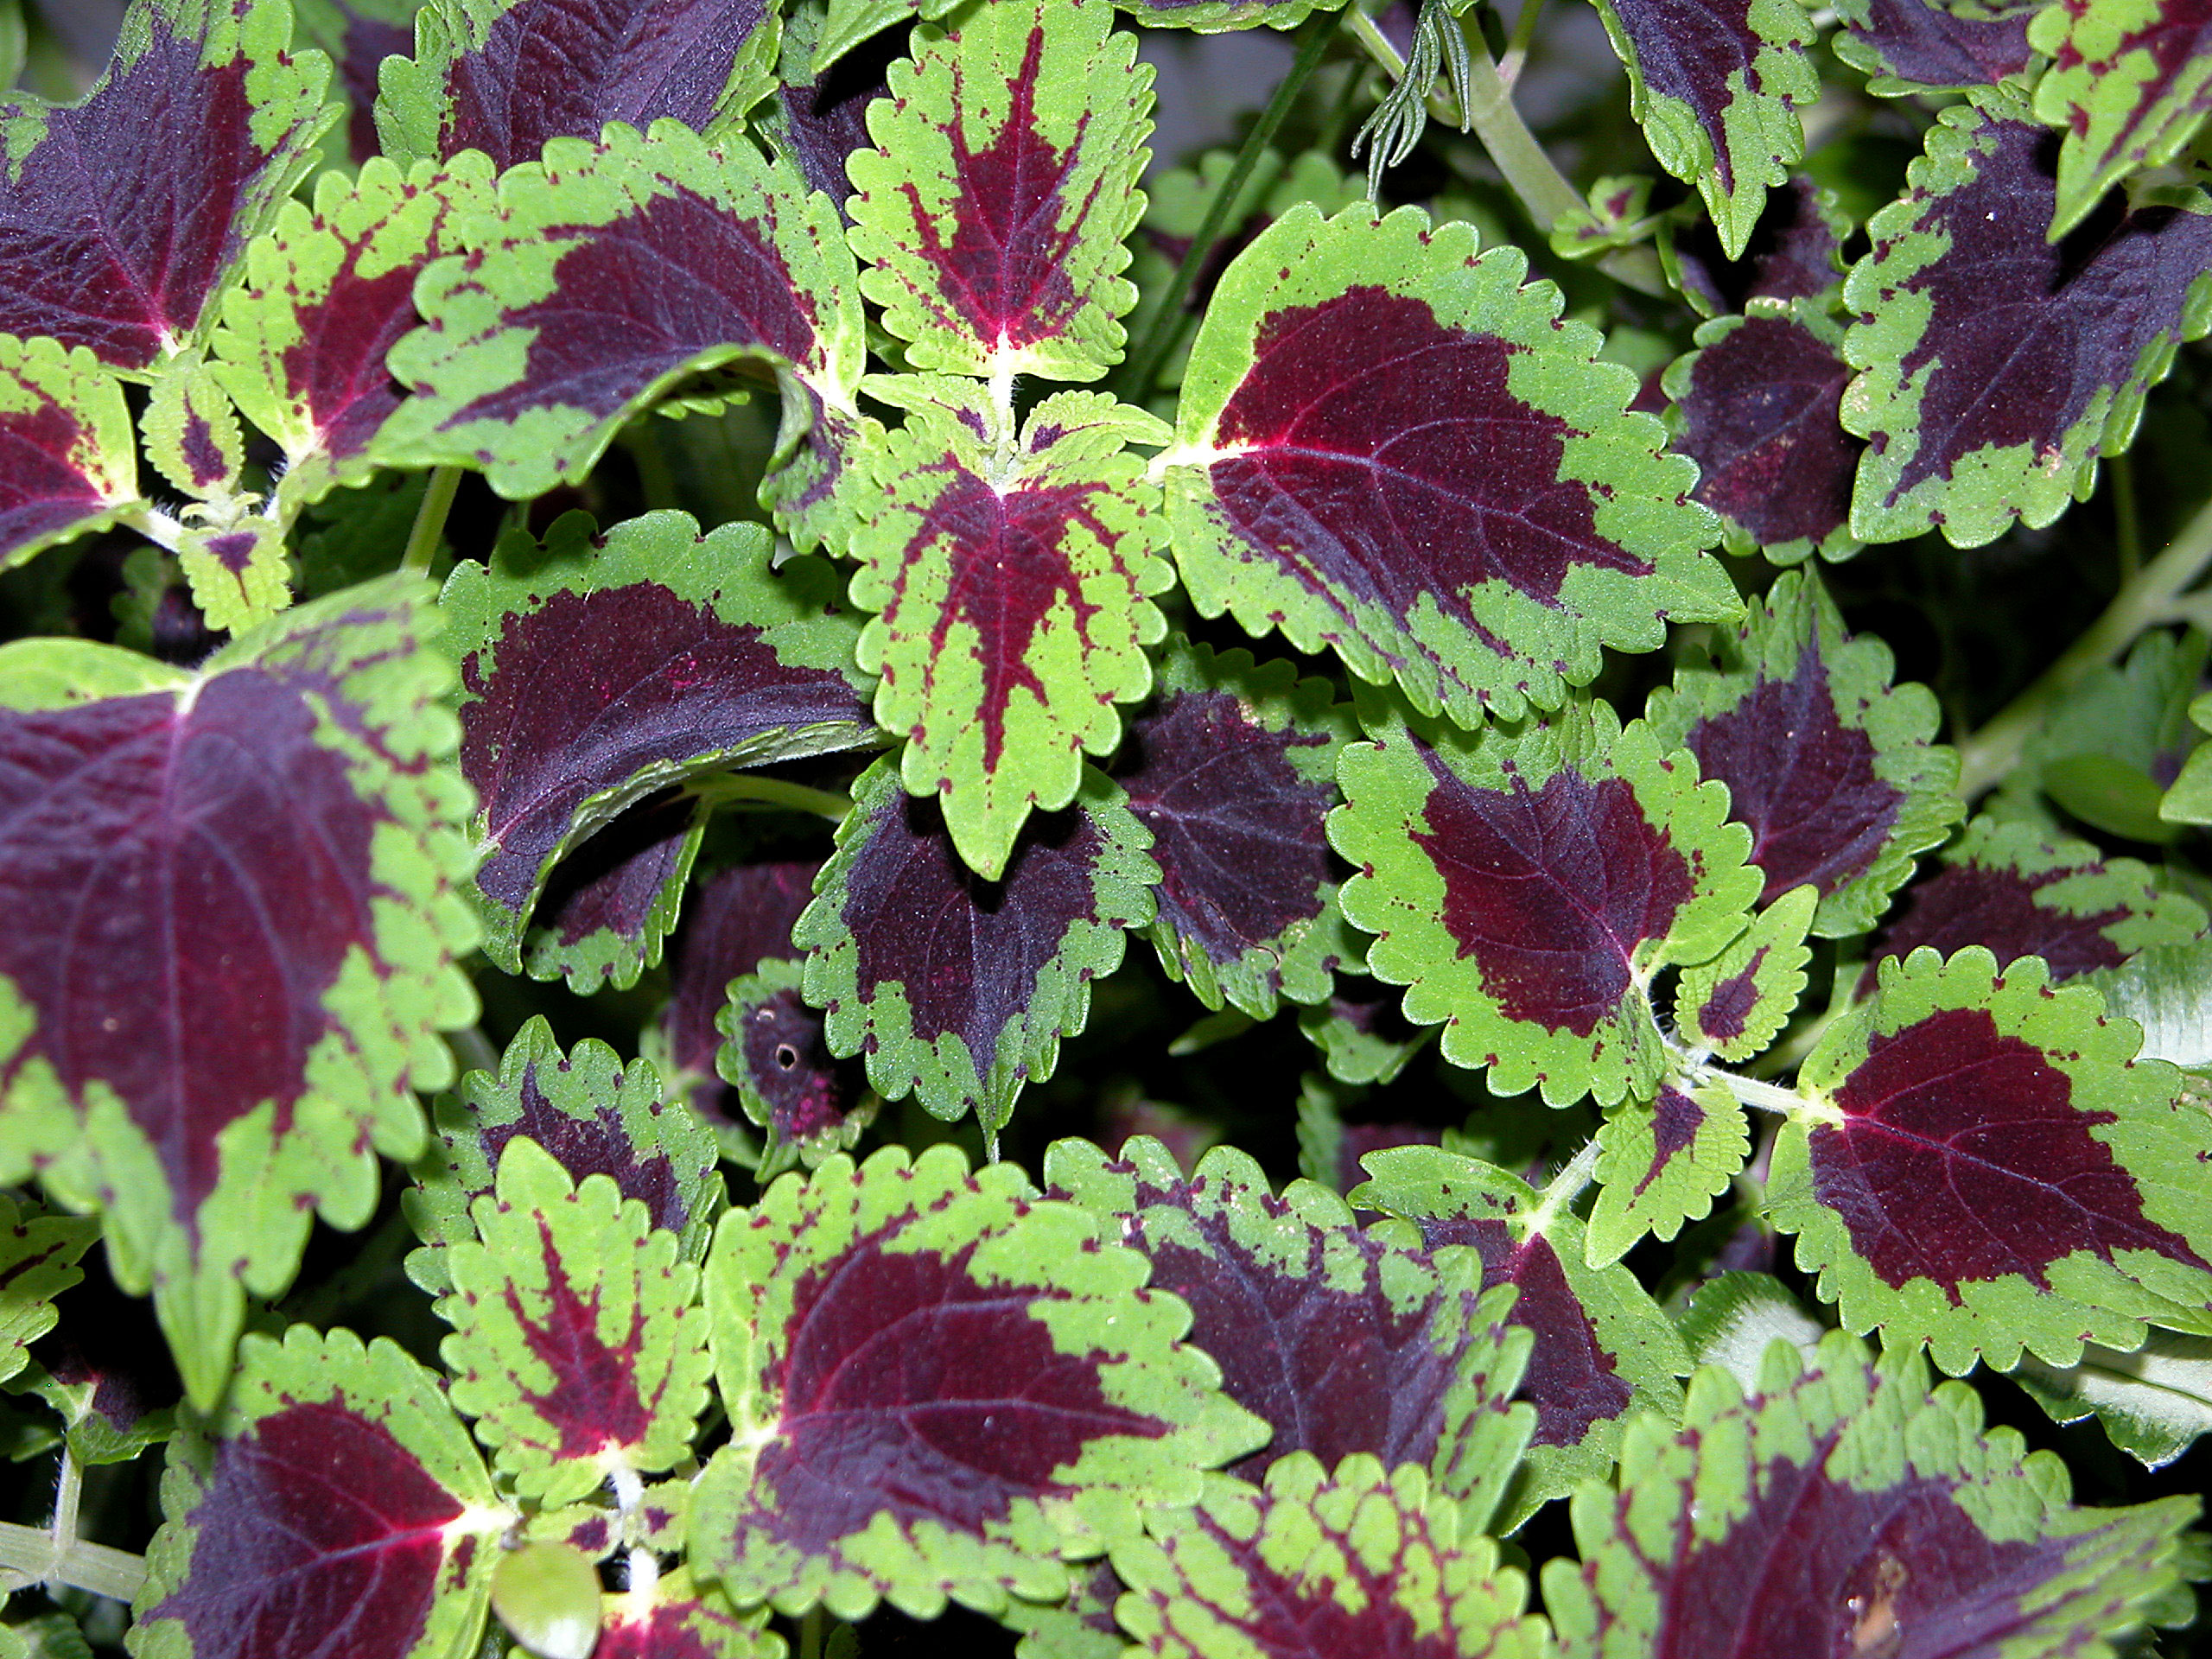 Plant some of these beauties for great garden color, even in shade